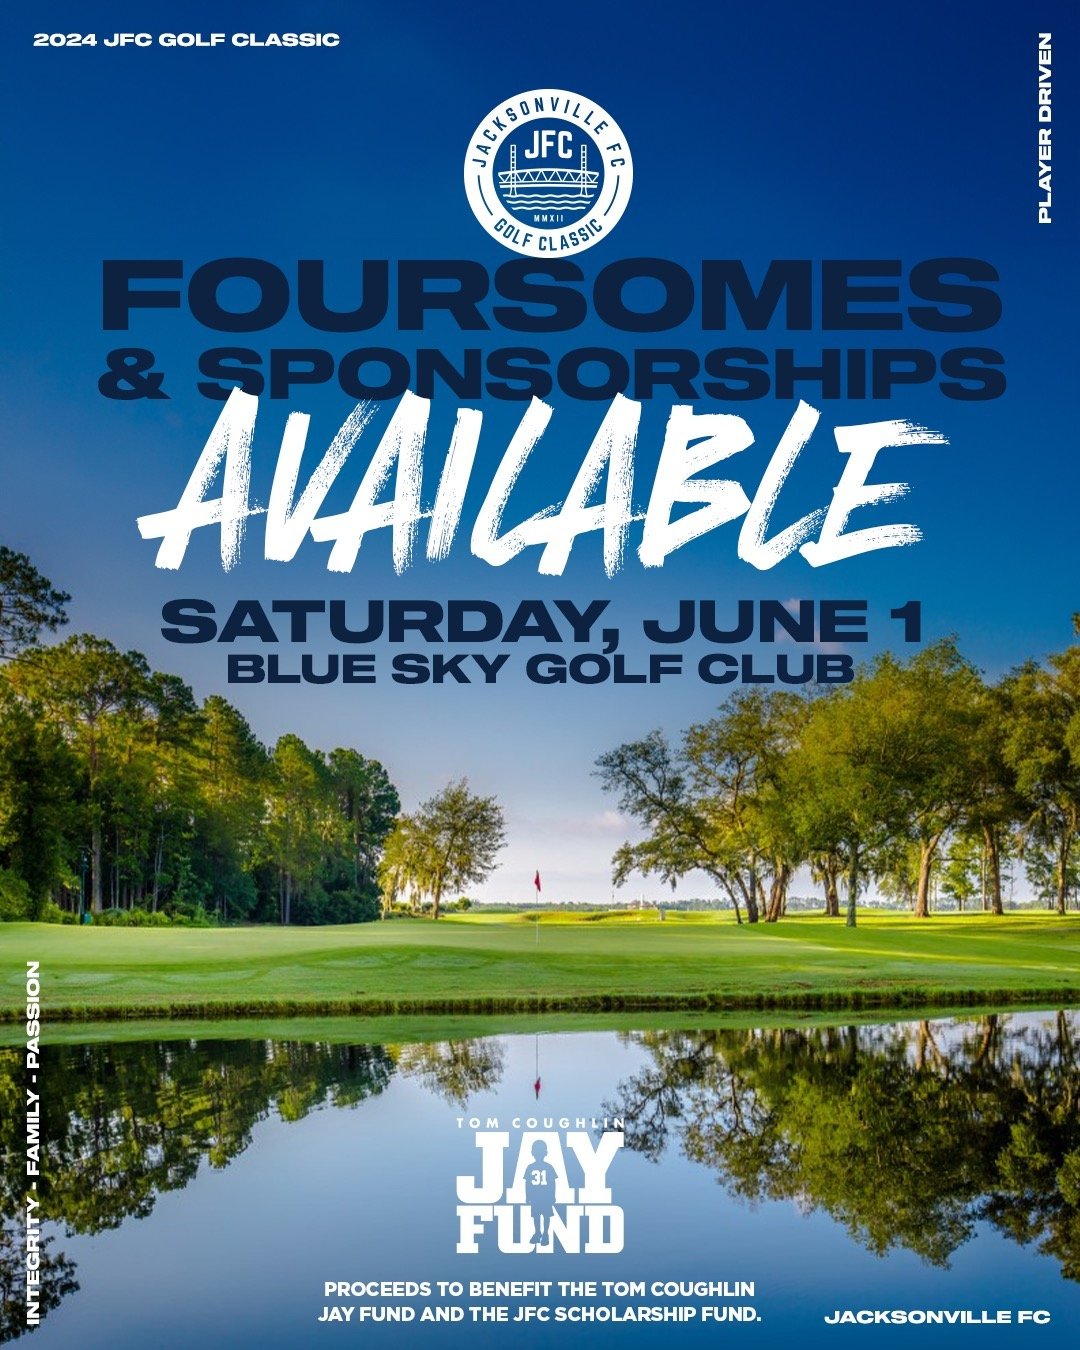 Calling all Golfers &amp; Sponsors!!!

Our Annual JFC Golf Classic is taking place on Saturday, June 1st at Blue Sky Golf Club. Proceeds to help benefit the Tom Coughlin Jay Fund and our JFC Scholarship Fund. 

Foursomes are filling up fast and we st